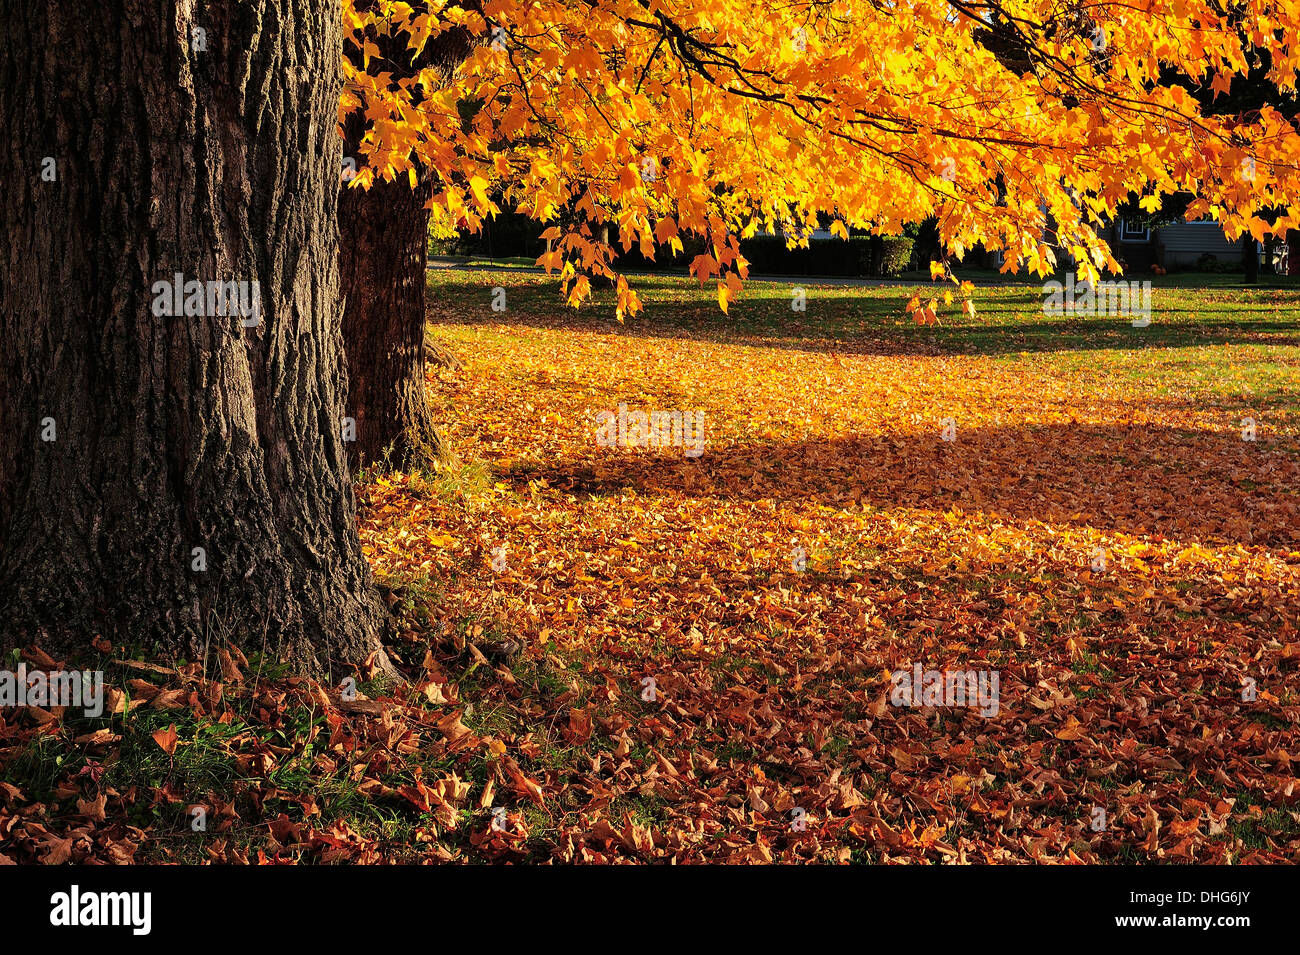 Maple tree trunks and lower branches with fallen maple leaves covering the ground. Stock Photo